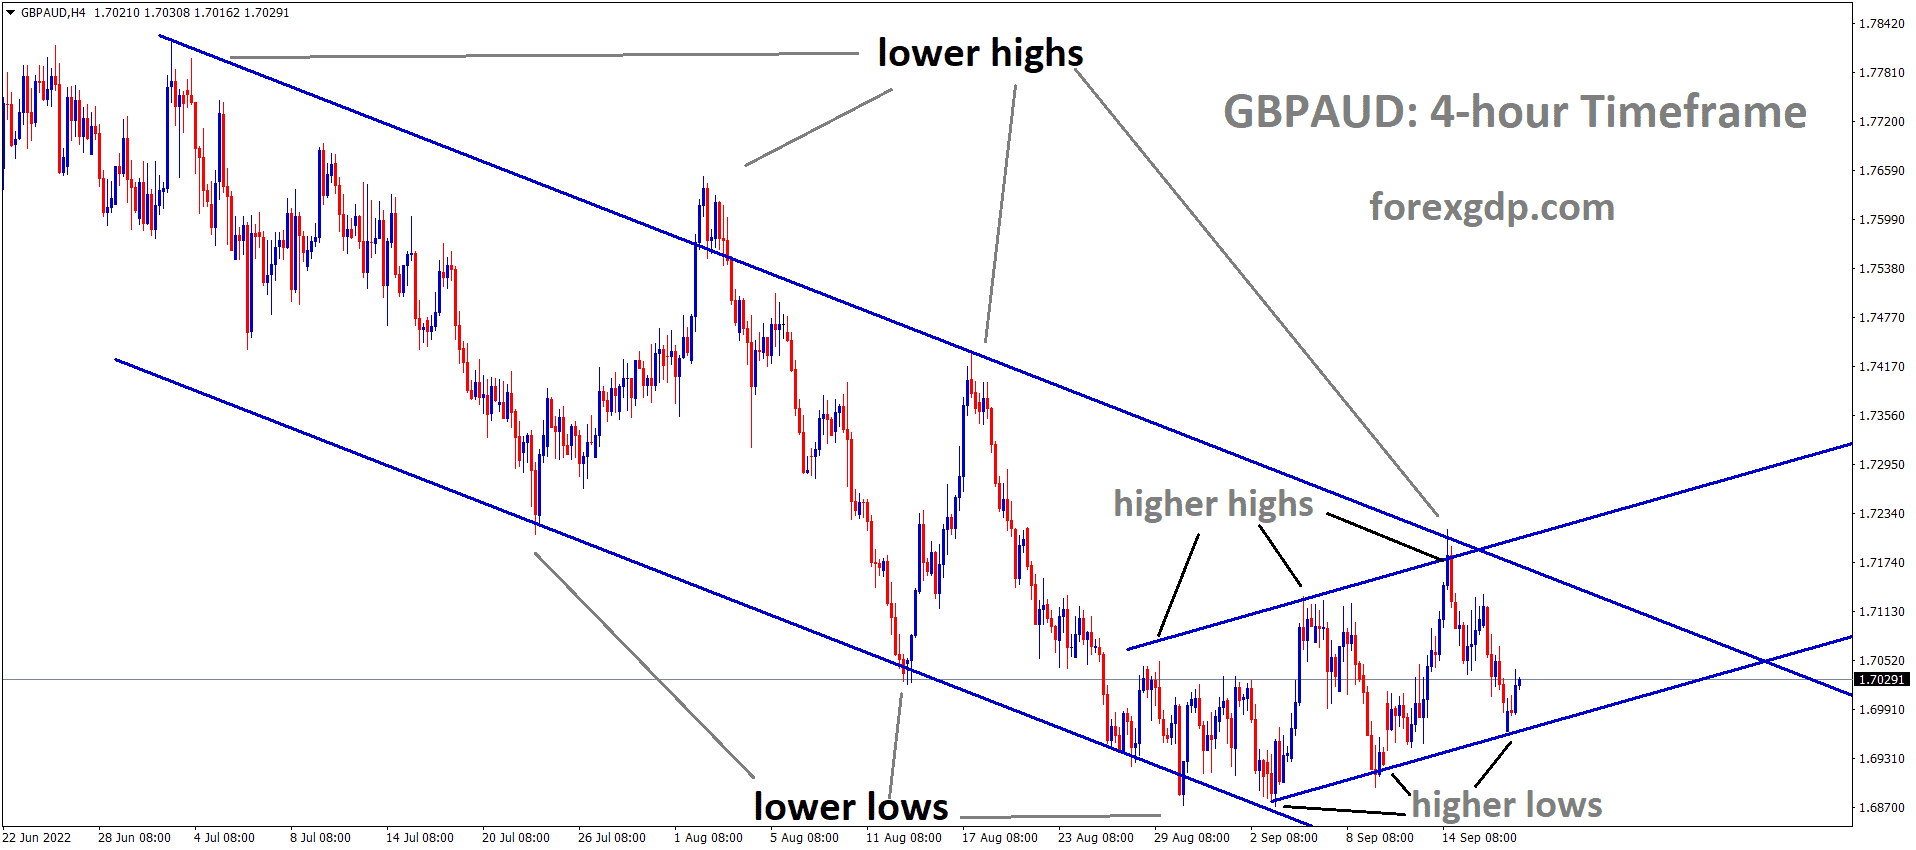 GBPAUD is moving in the descending channel and the market has rebounded from the higher low area of the minor Ascending channel